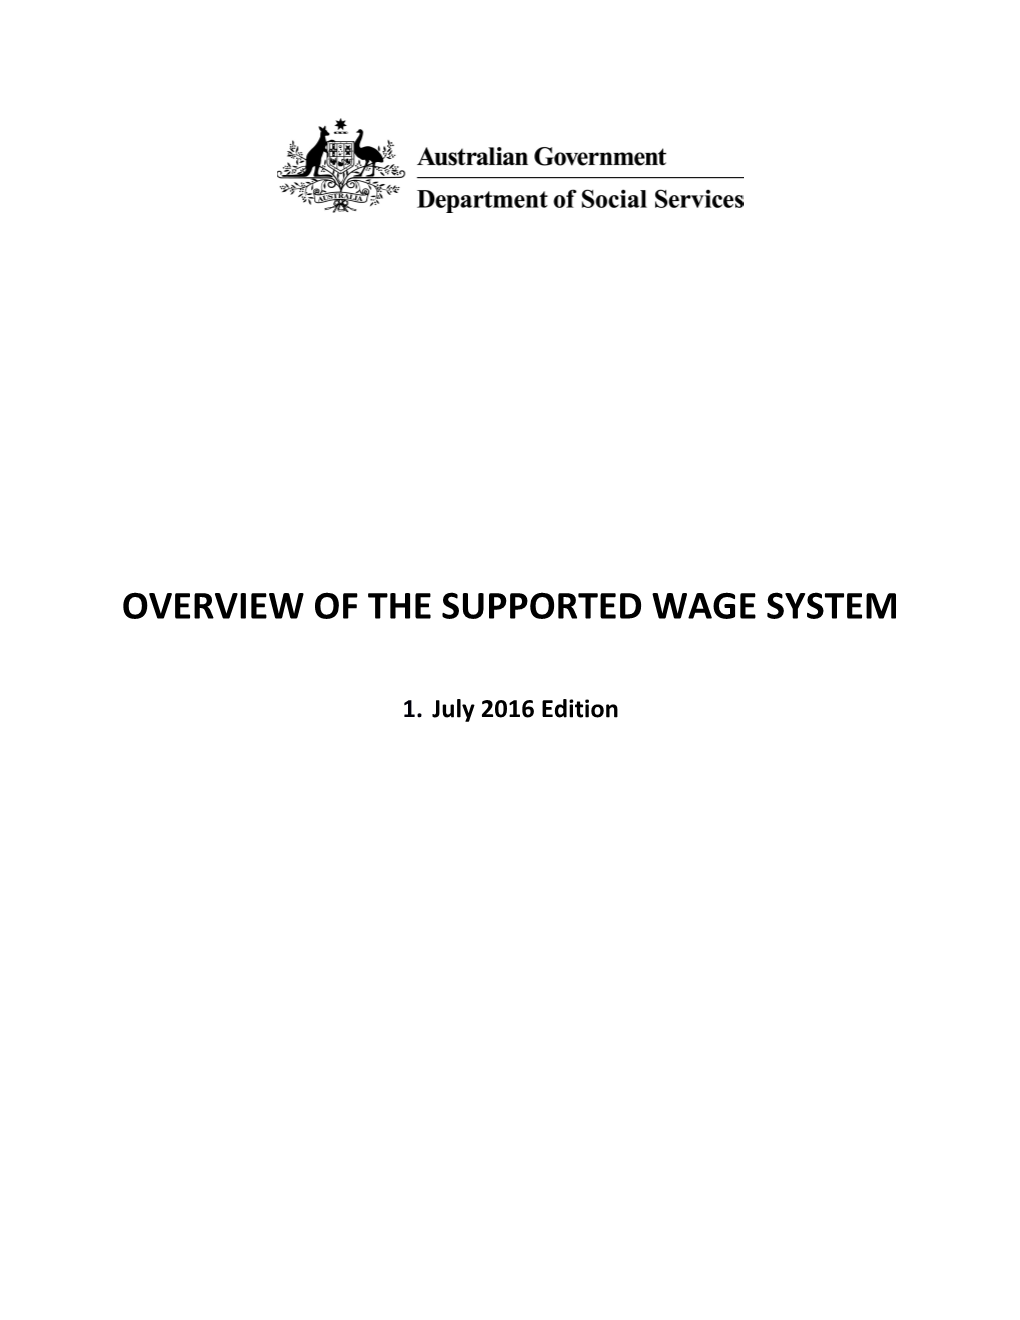 Overview How to Use the Supported Wage System